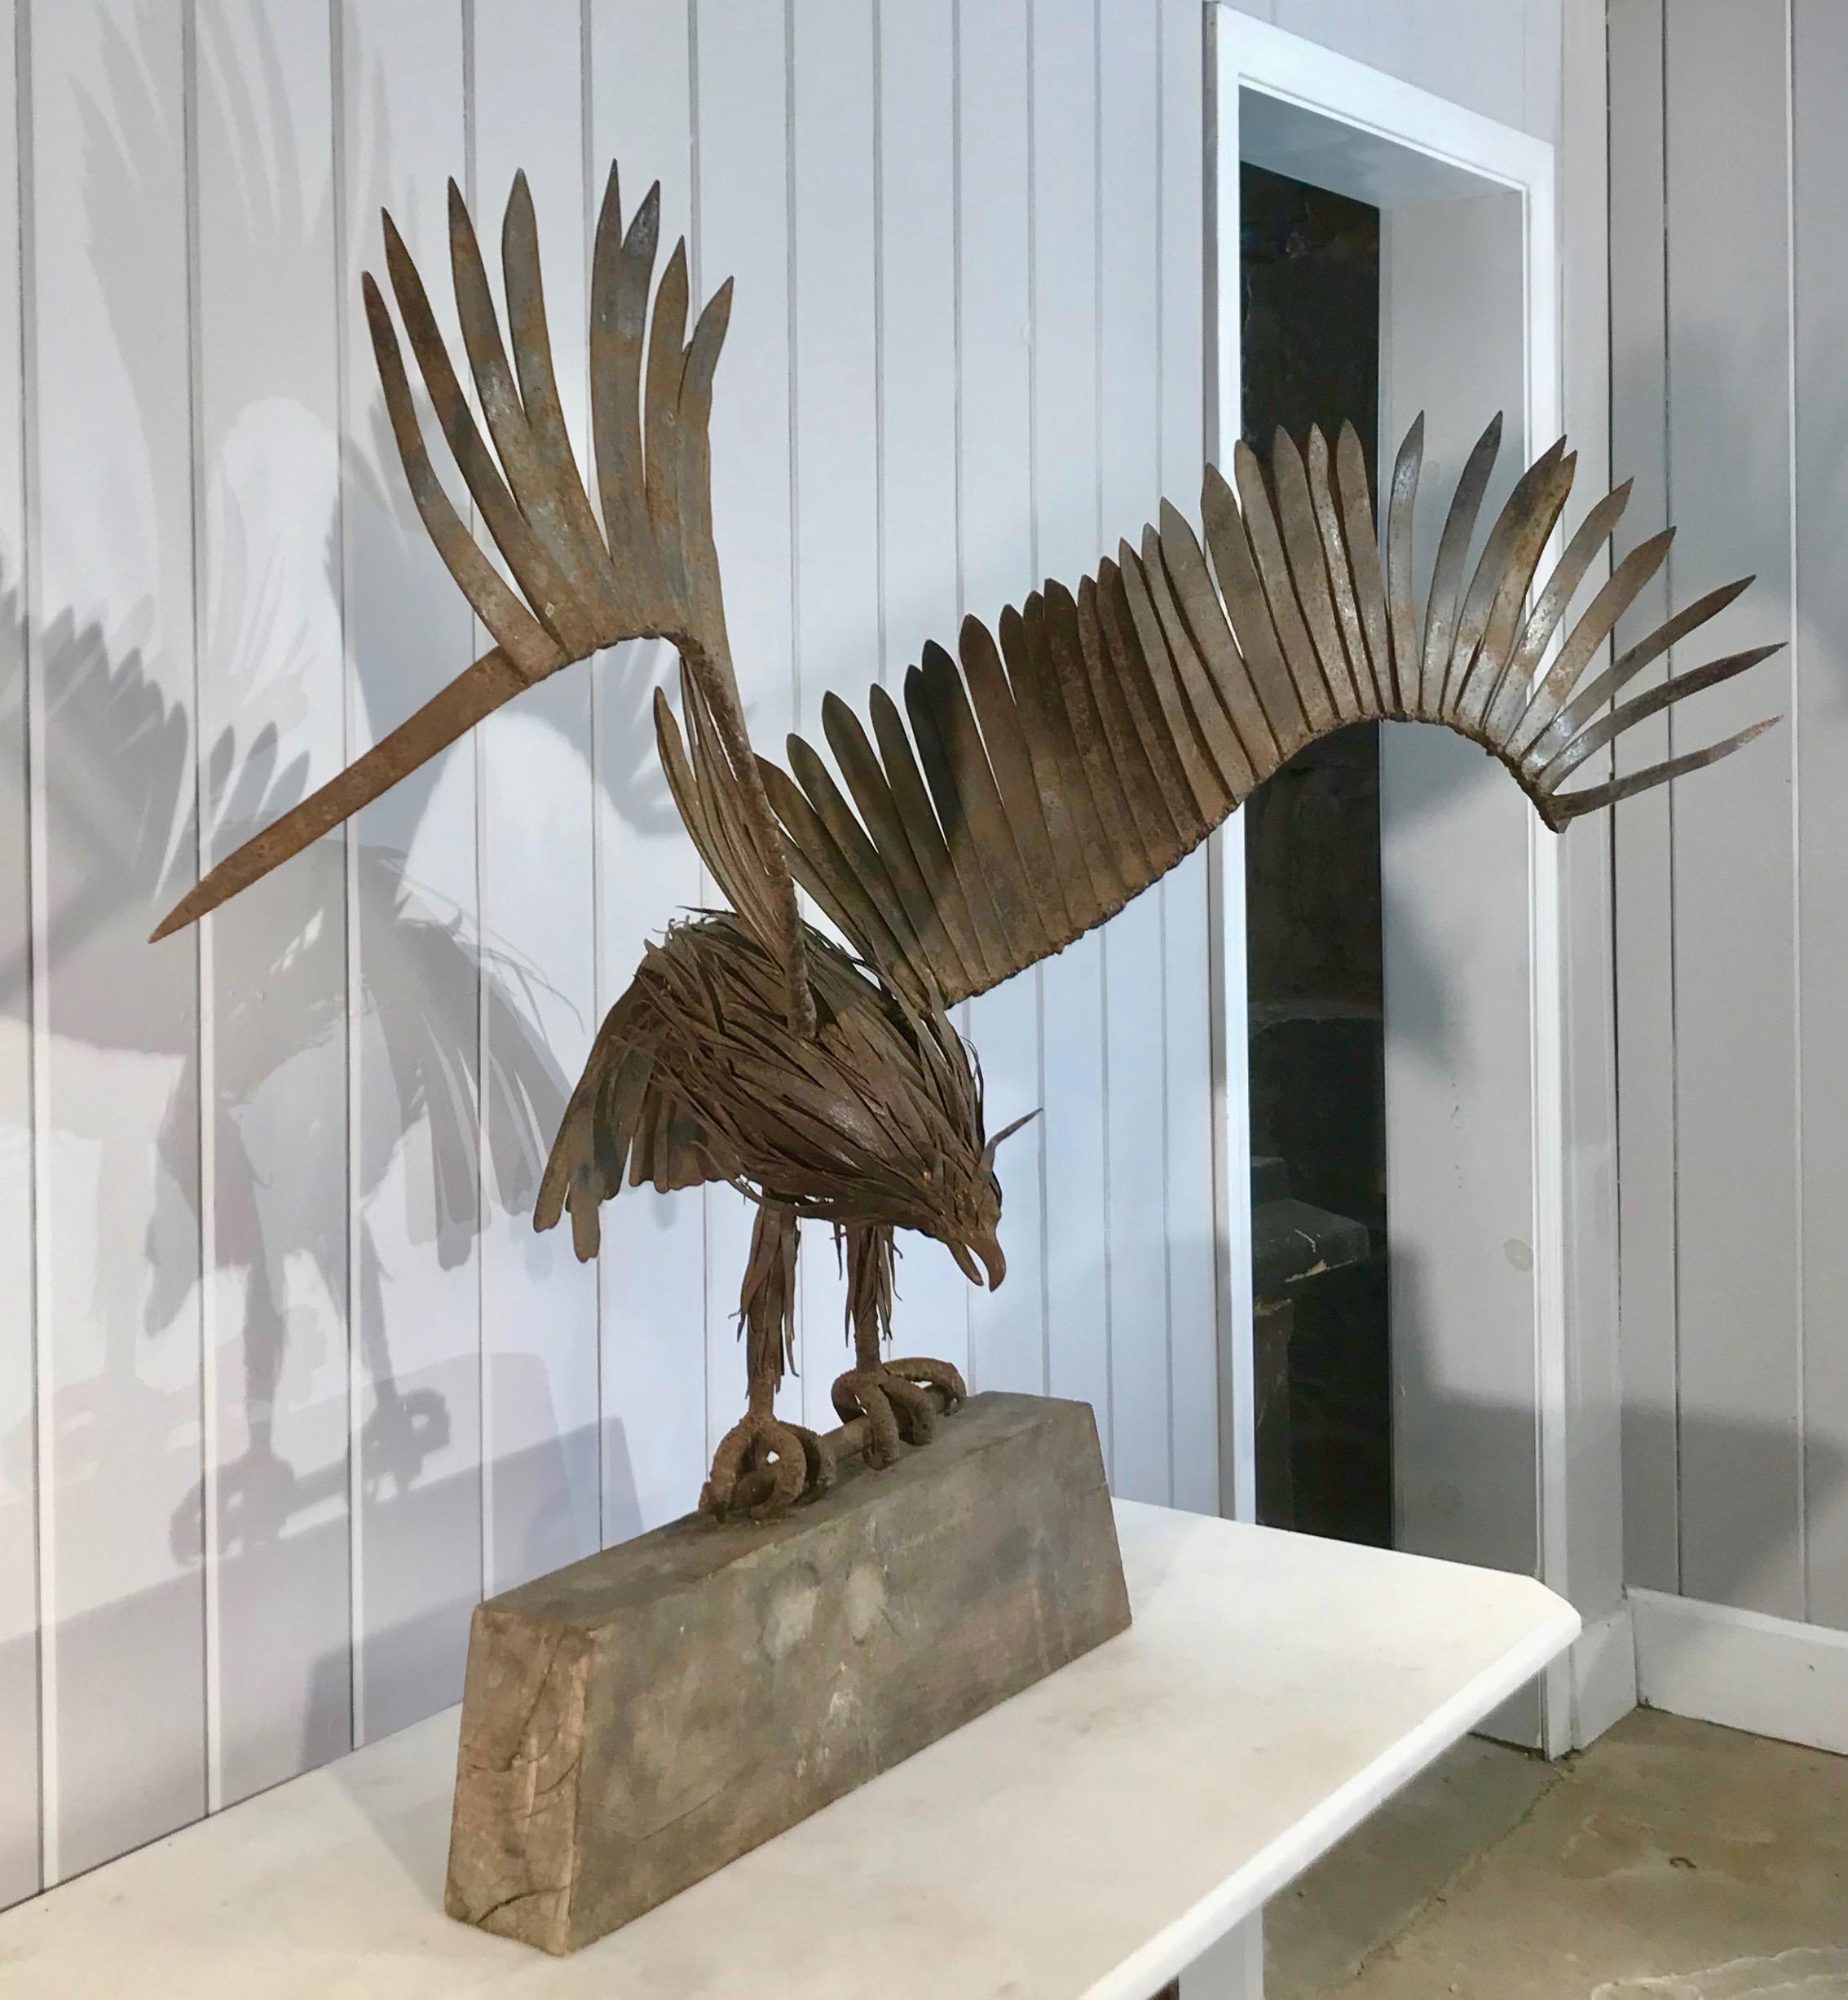 We are suckers for great animal sculpture, regardless of the age, and this handmade wrought iron sculpture of a landing eagle does not disappoint. Reputedly made by a French artisan from the Massif Central in the 1940s and handed down through his